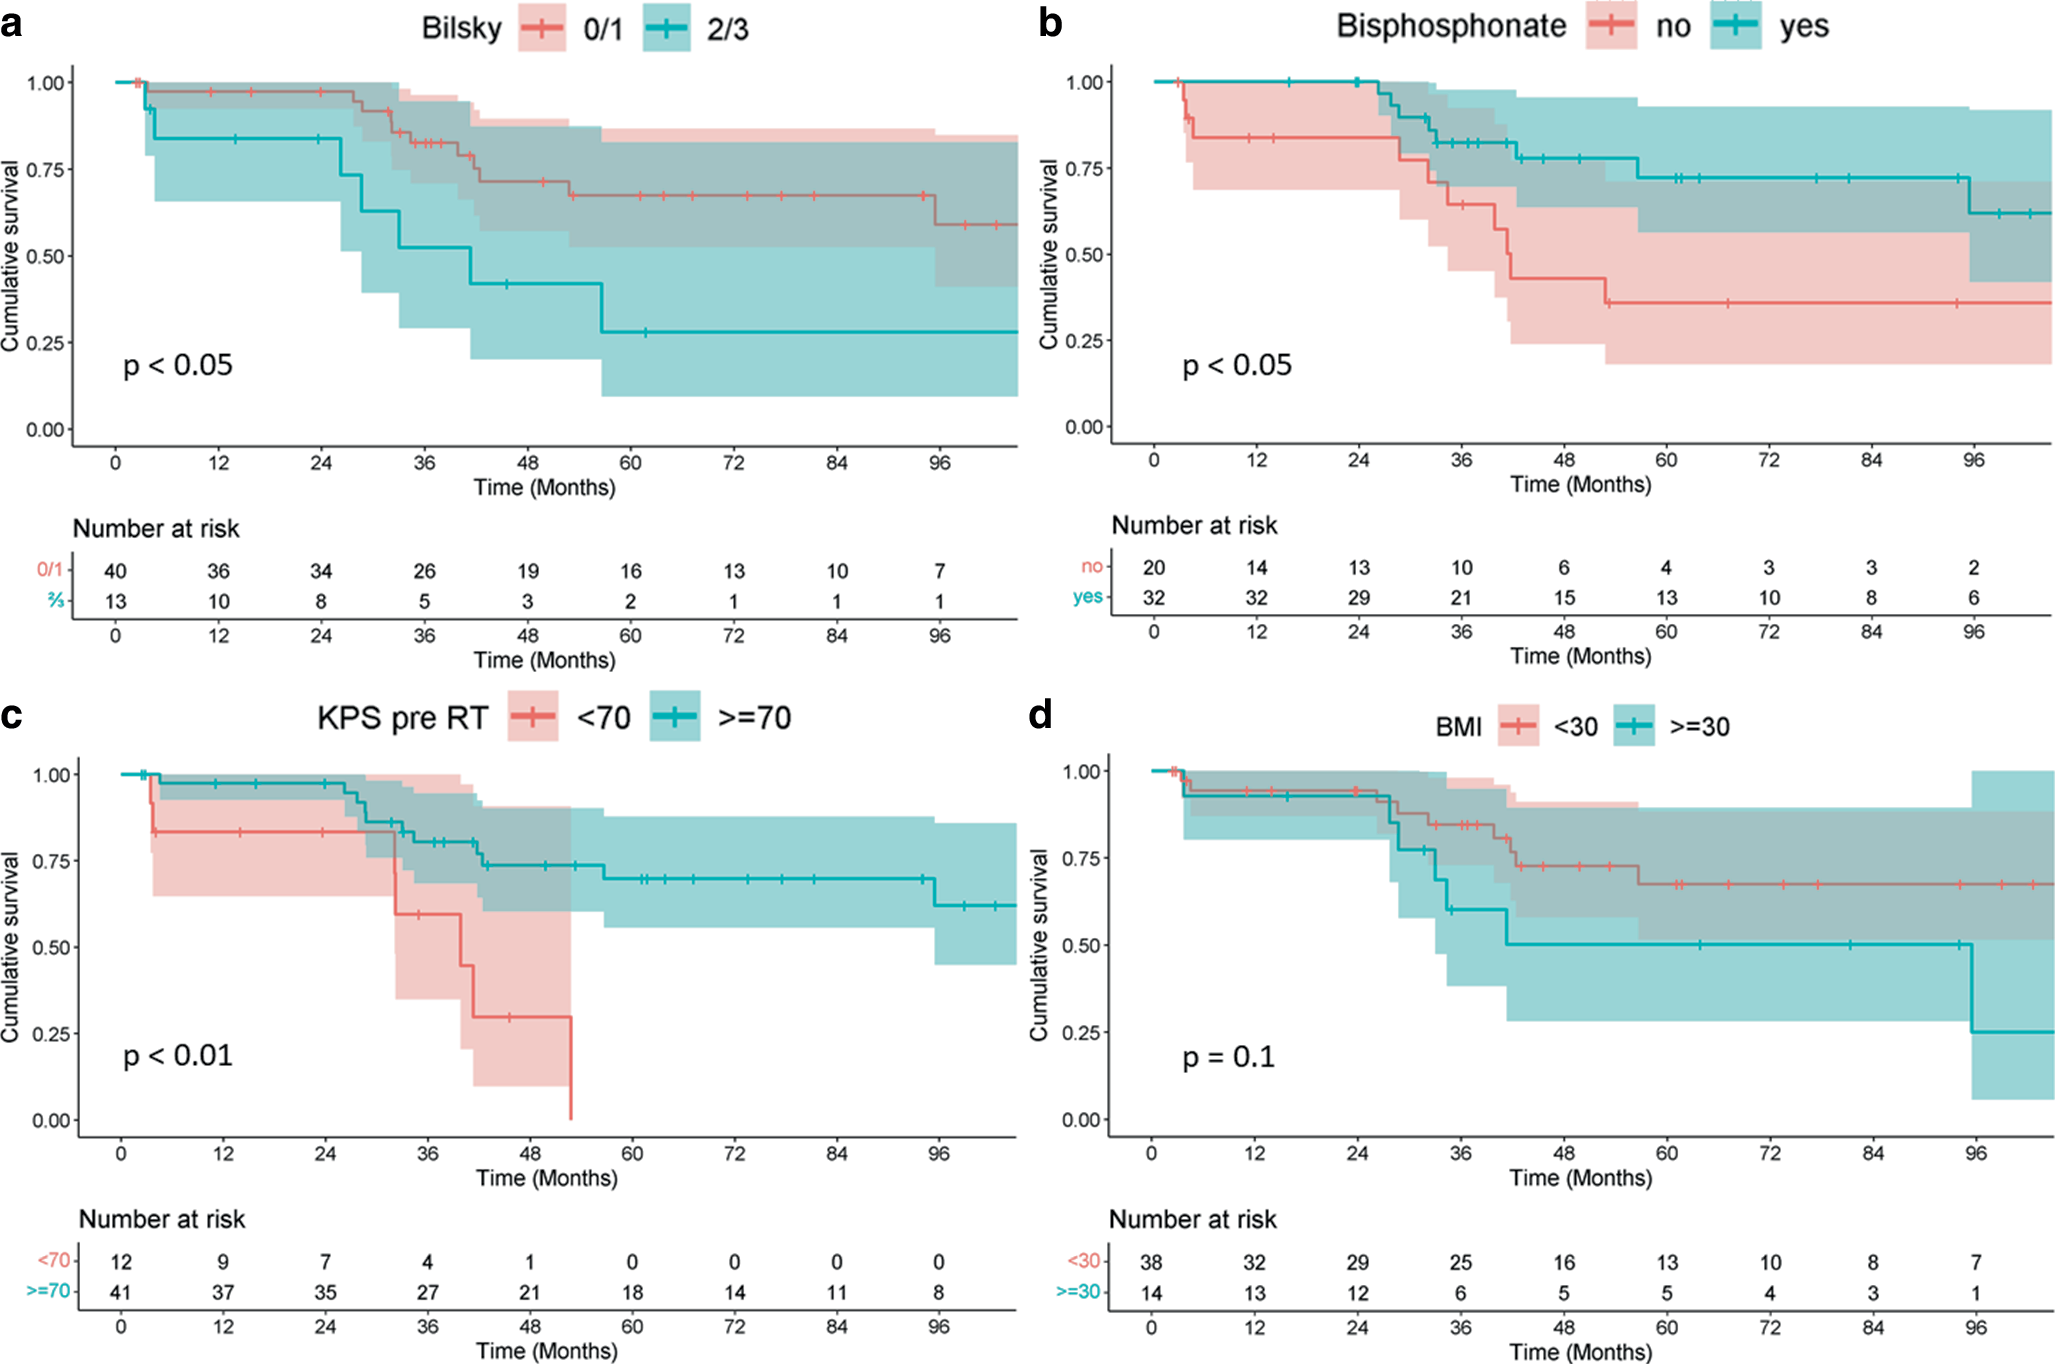 Excellent long-term pain response and local control following postoperative radiotherapy in patients with multiple myeloma